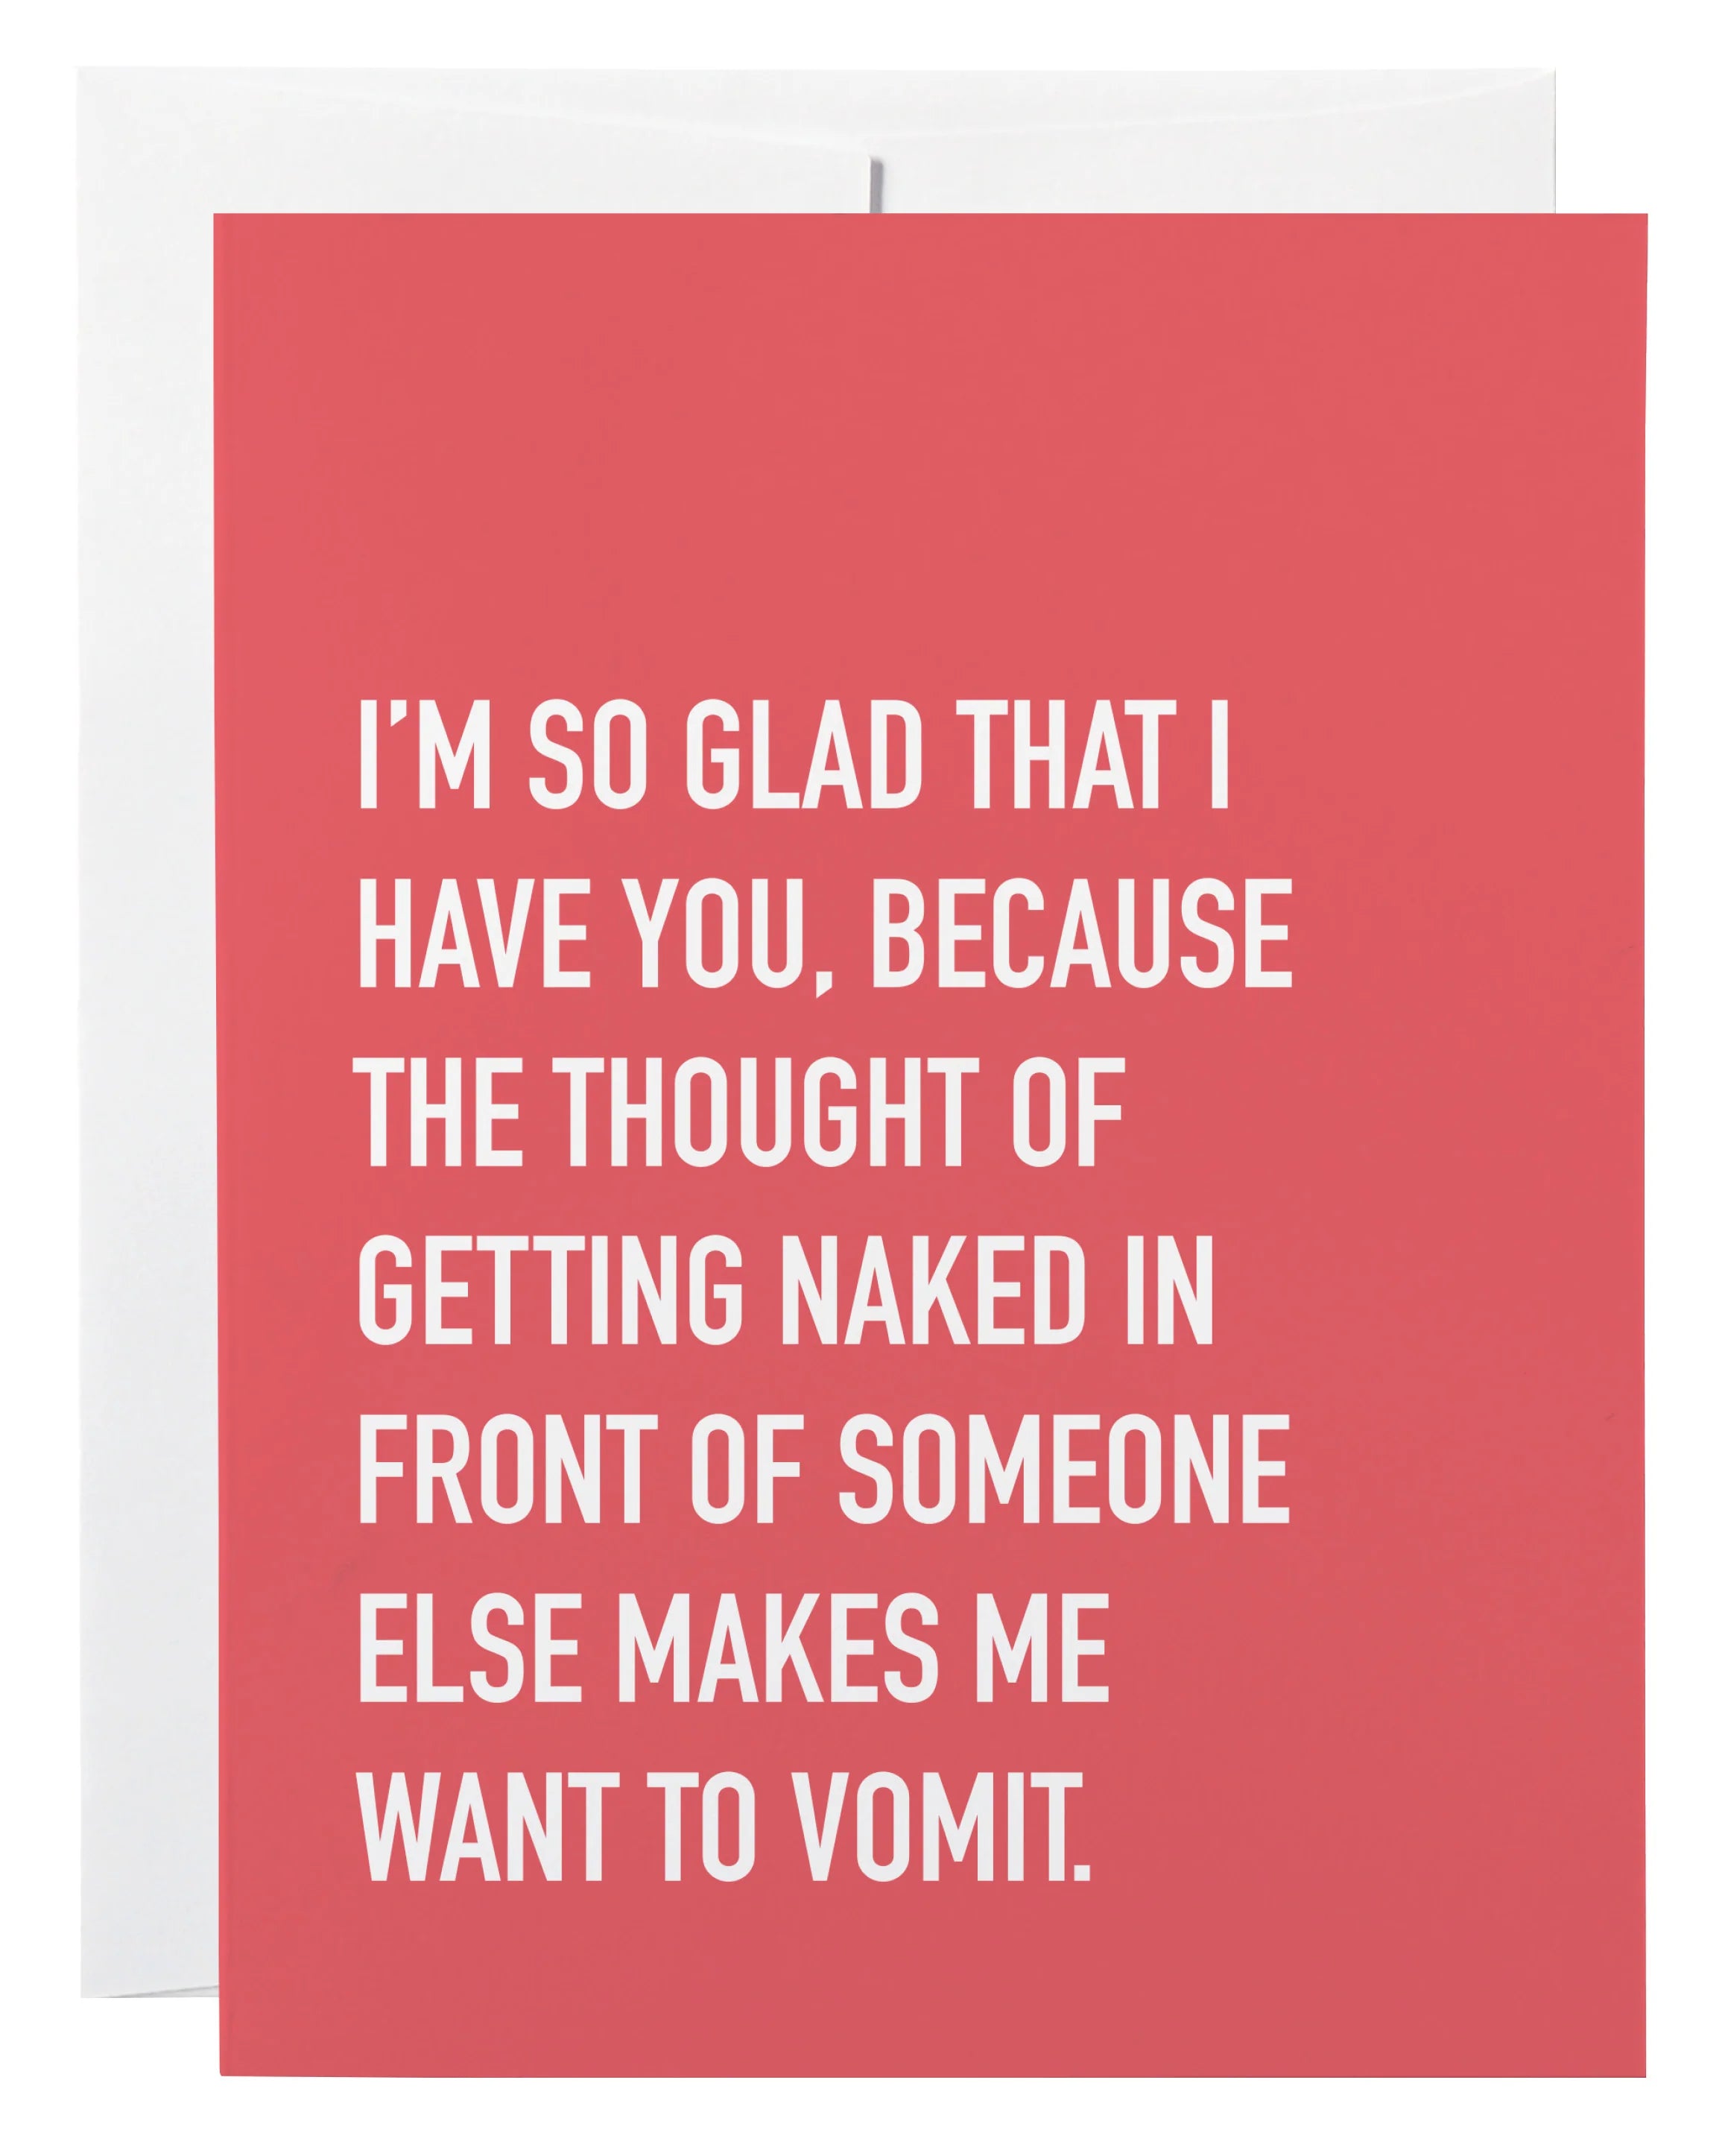 getting naked | card